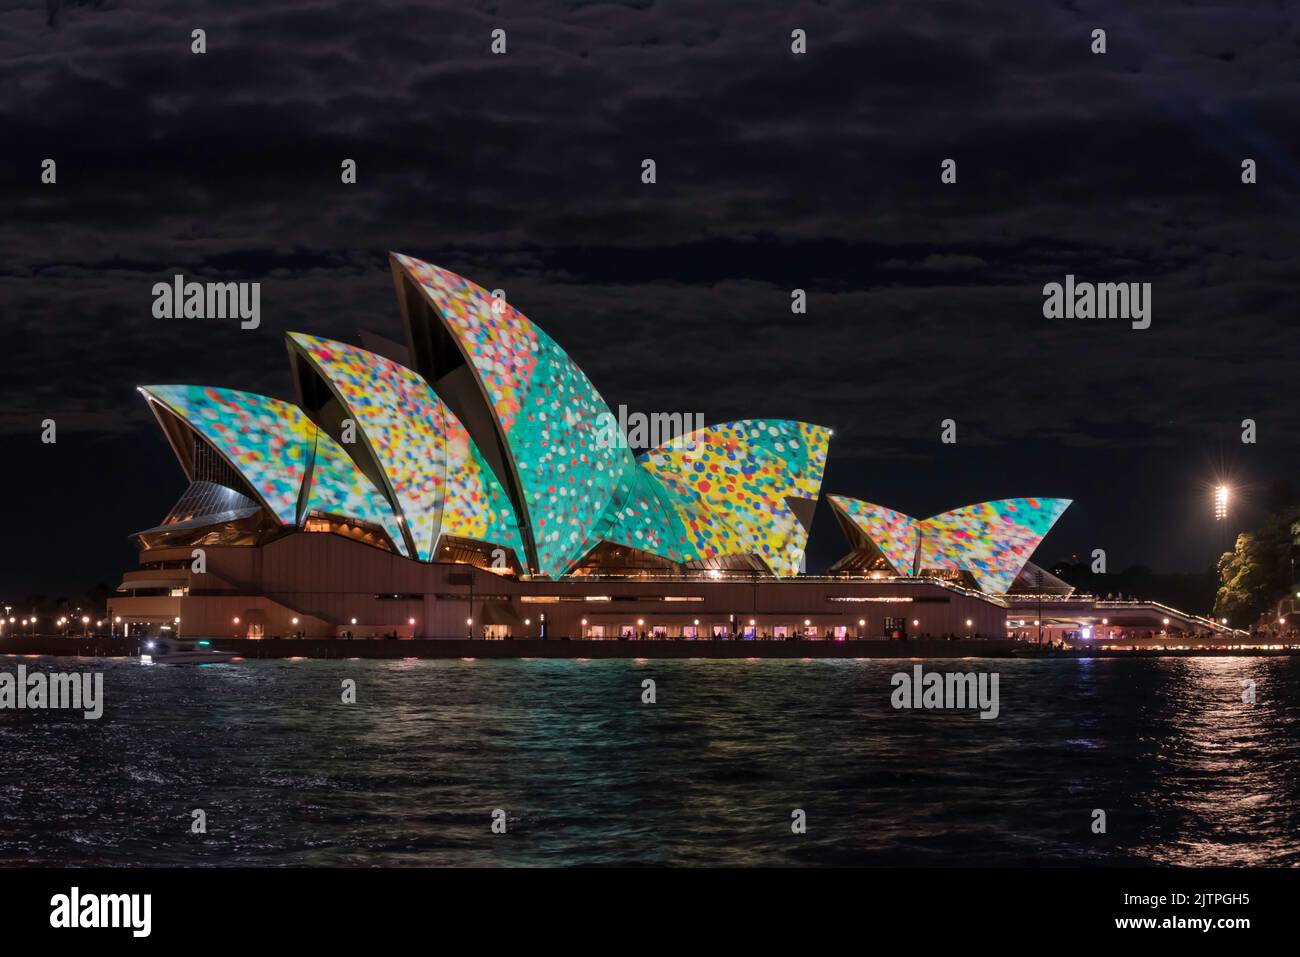 The Sydney Opera House and part of Circular Quay lit up with multicoloured projections at night during Vivid Sydney 2022 in Australia Stock Photo